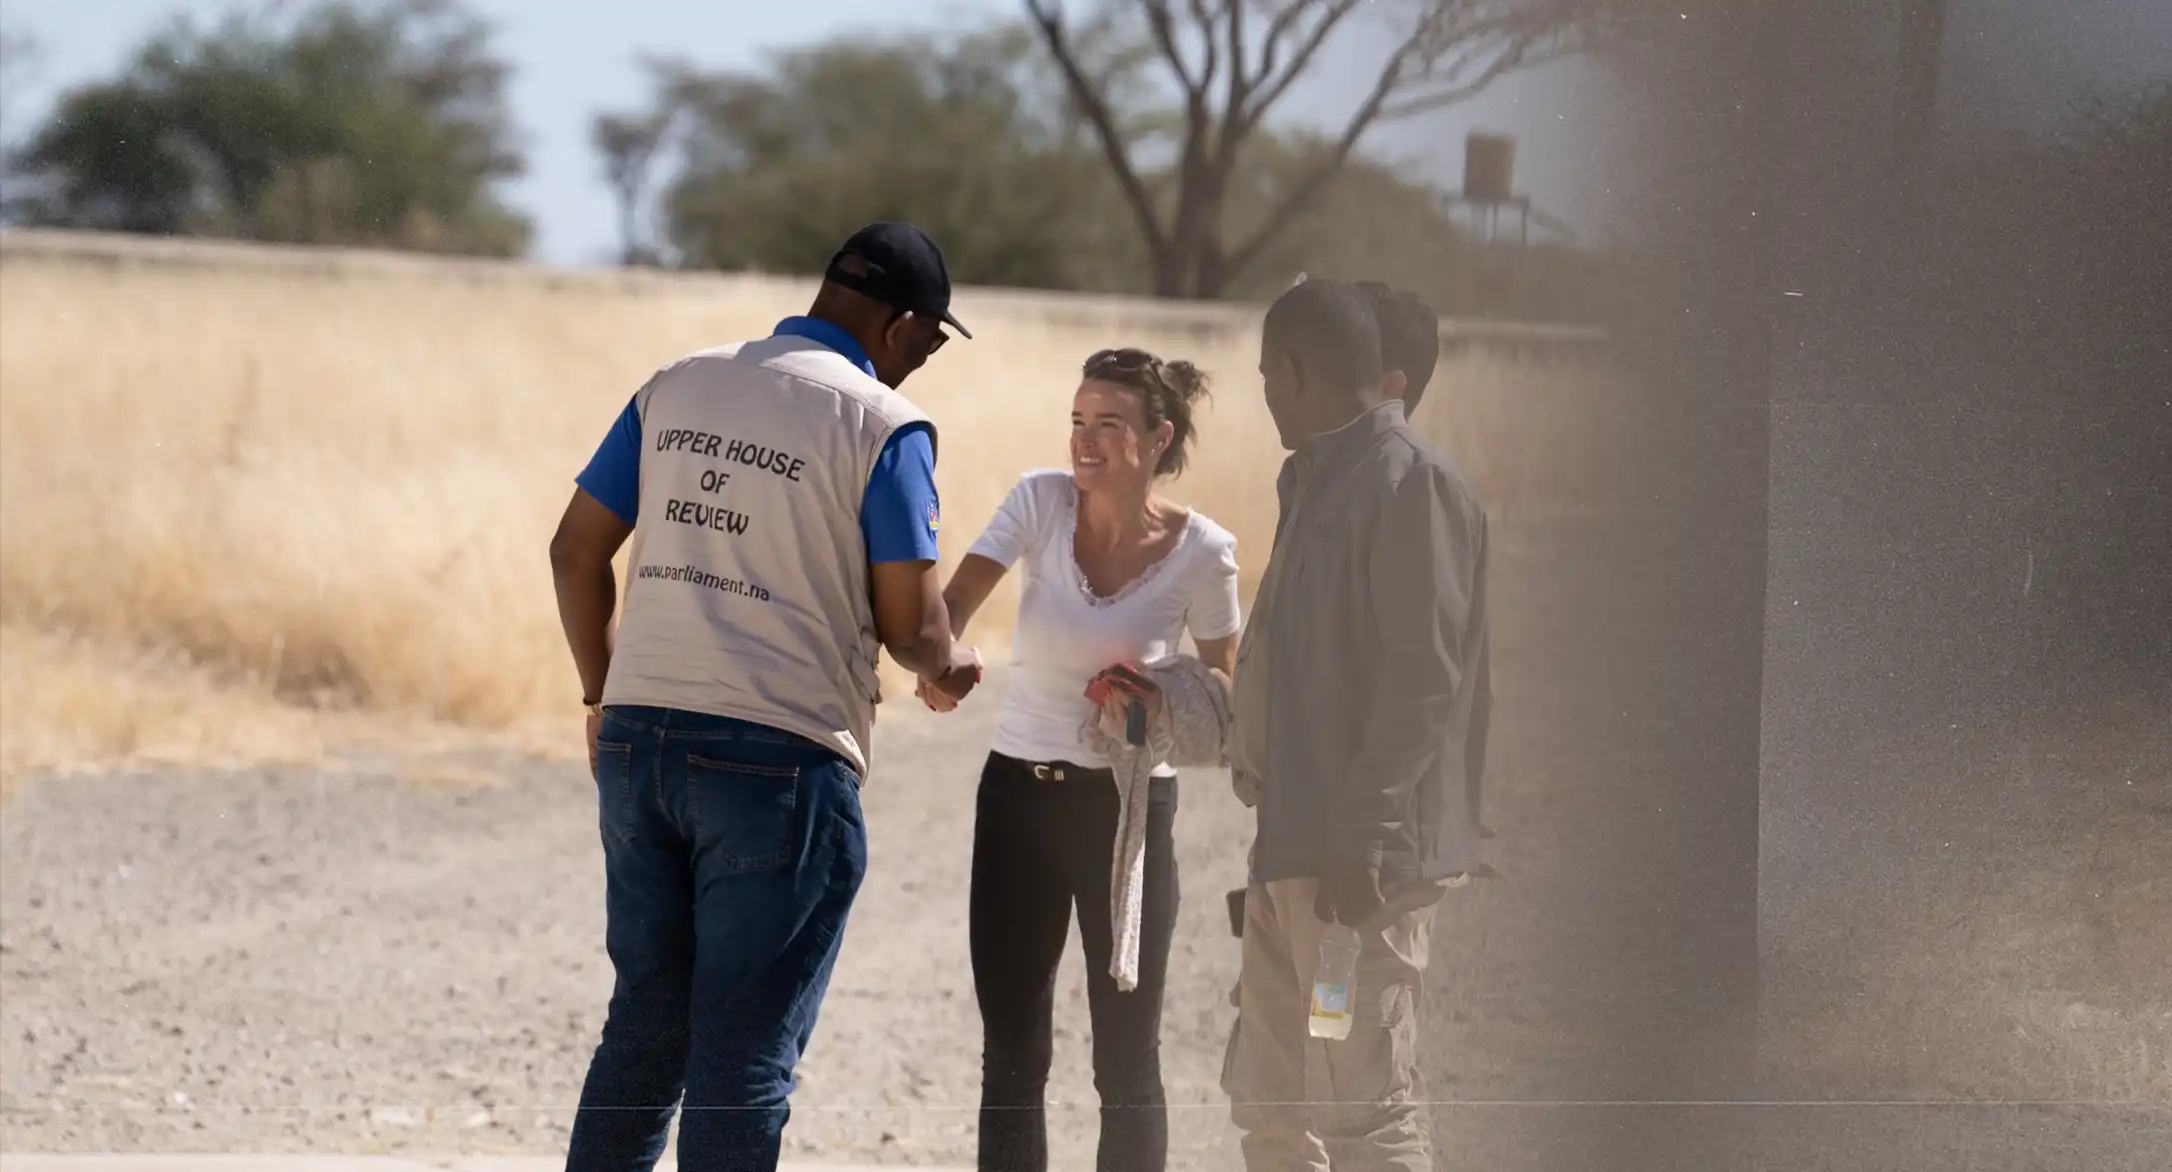 Group of researchers and parliament representatives shaking hands on gravel road in the savanna